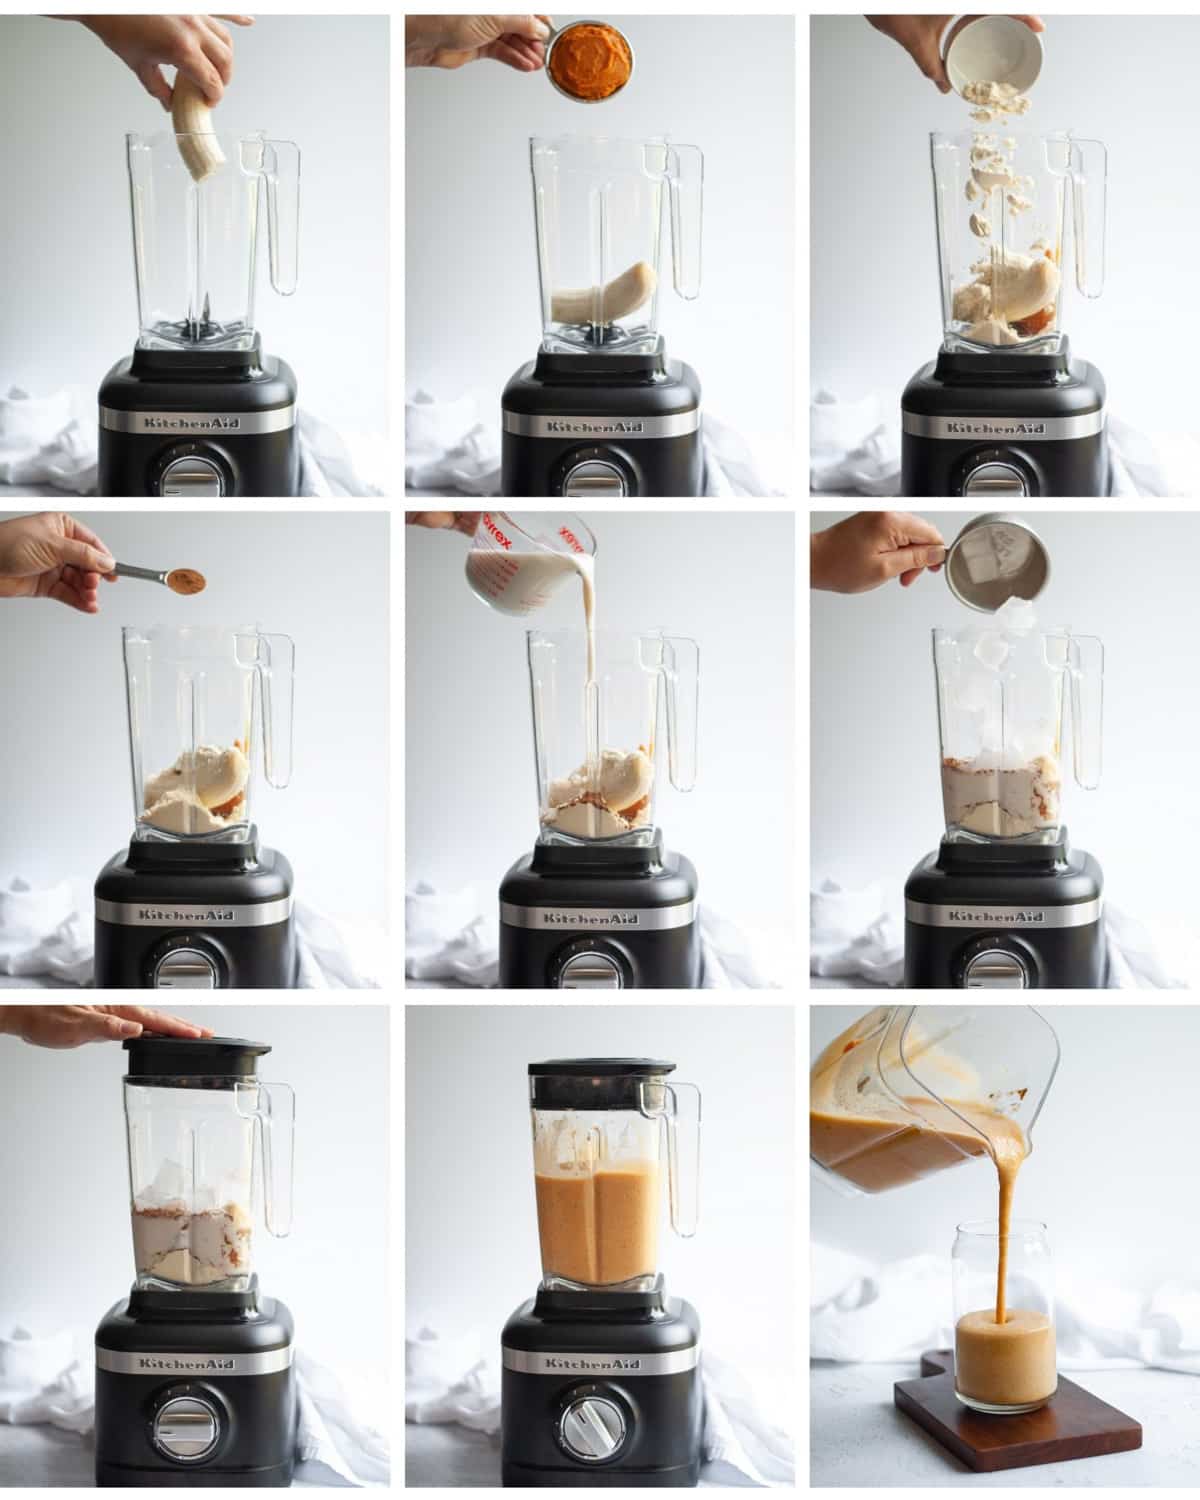 9-image collage showing how to make a pumpkin pie protein shake.